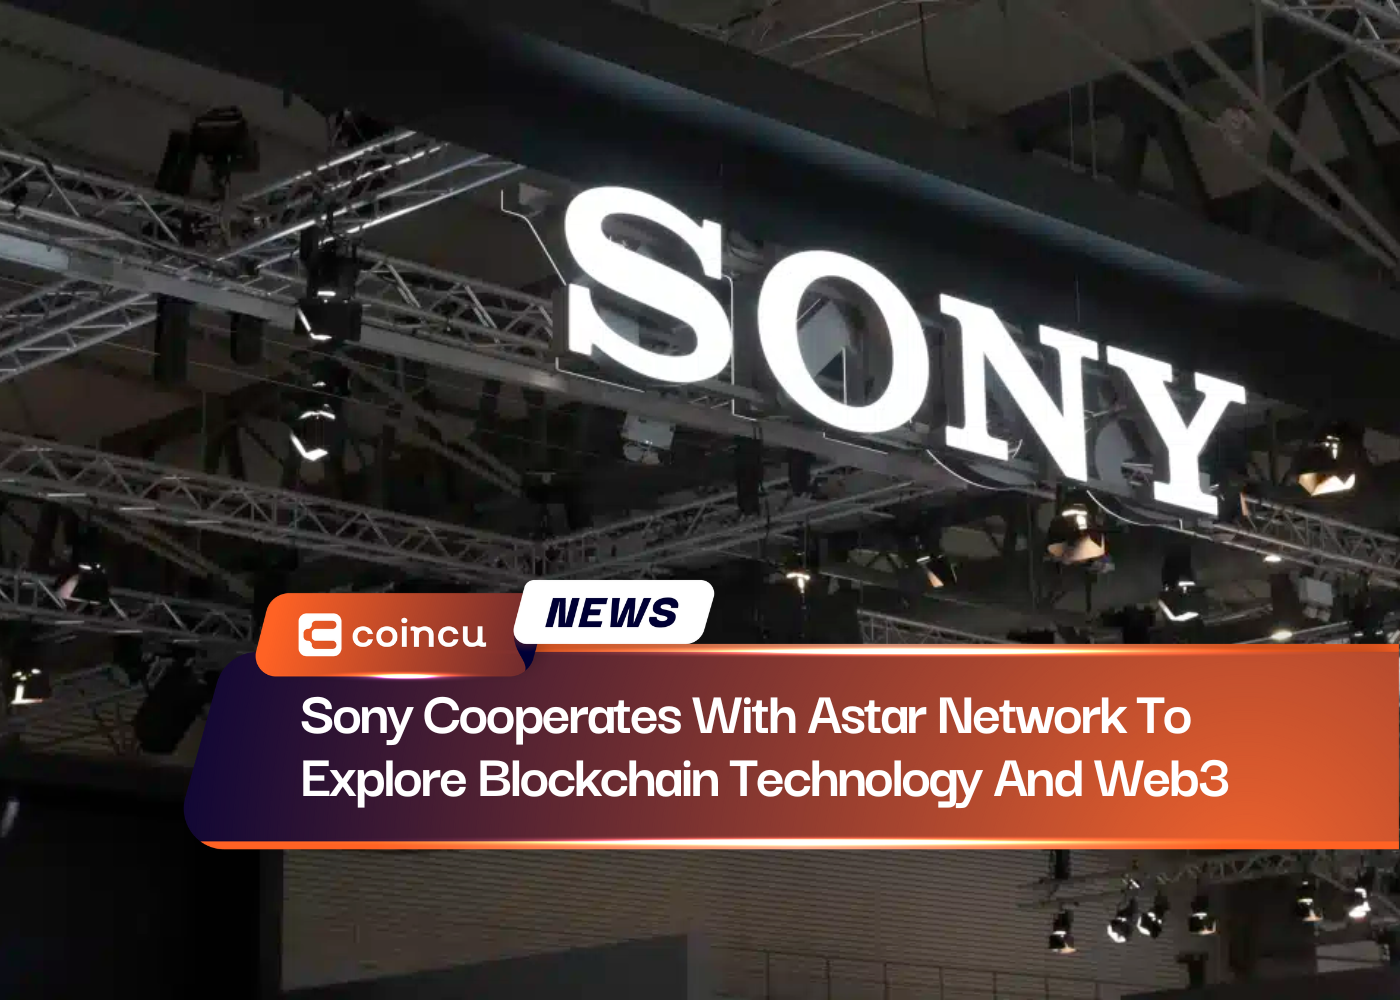 Sony Cooperates With Astar Network To Explore Blockchain Technology And Web3